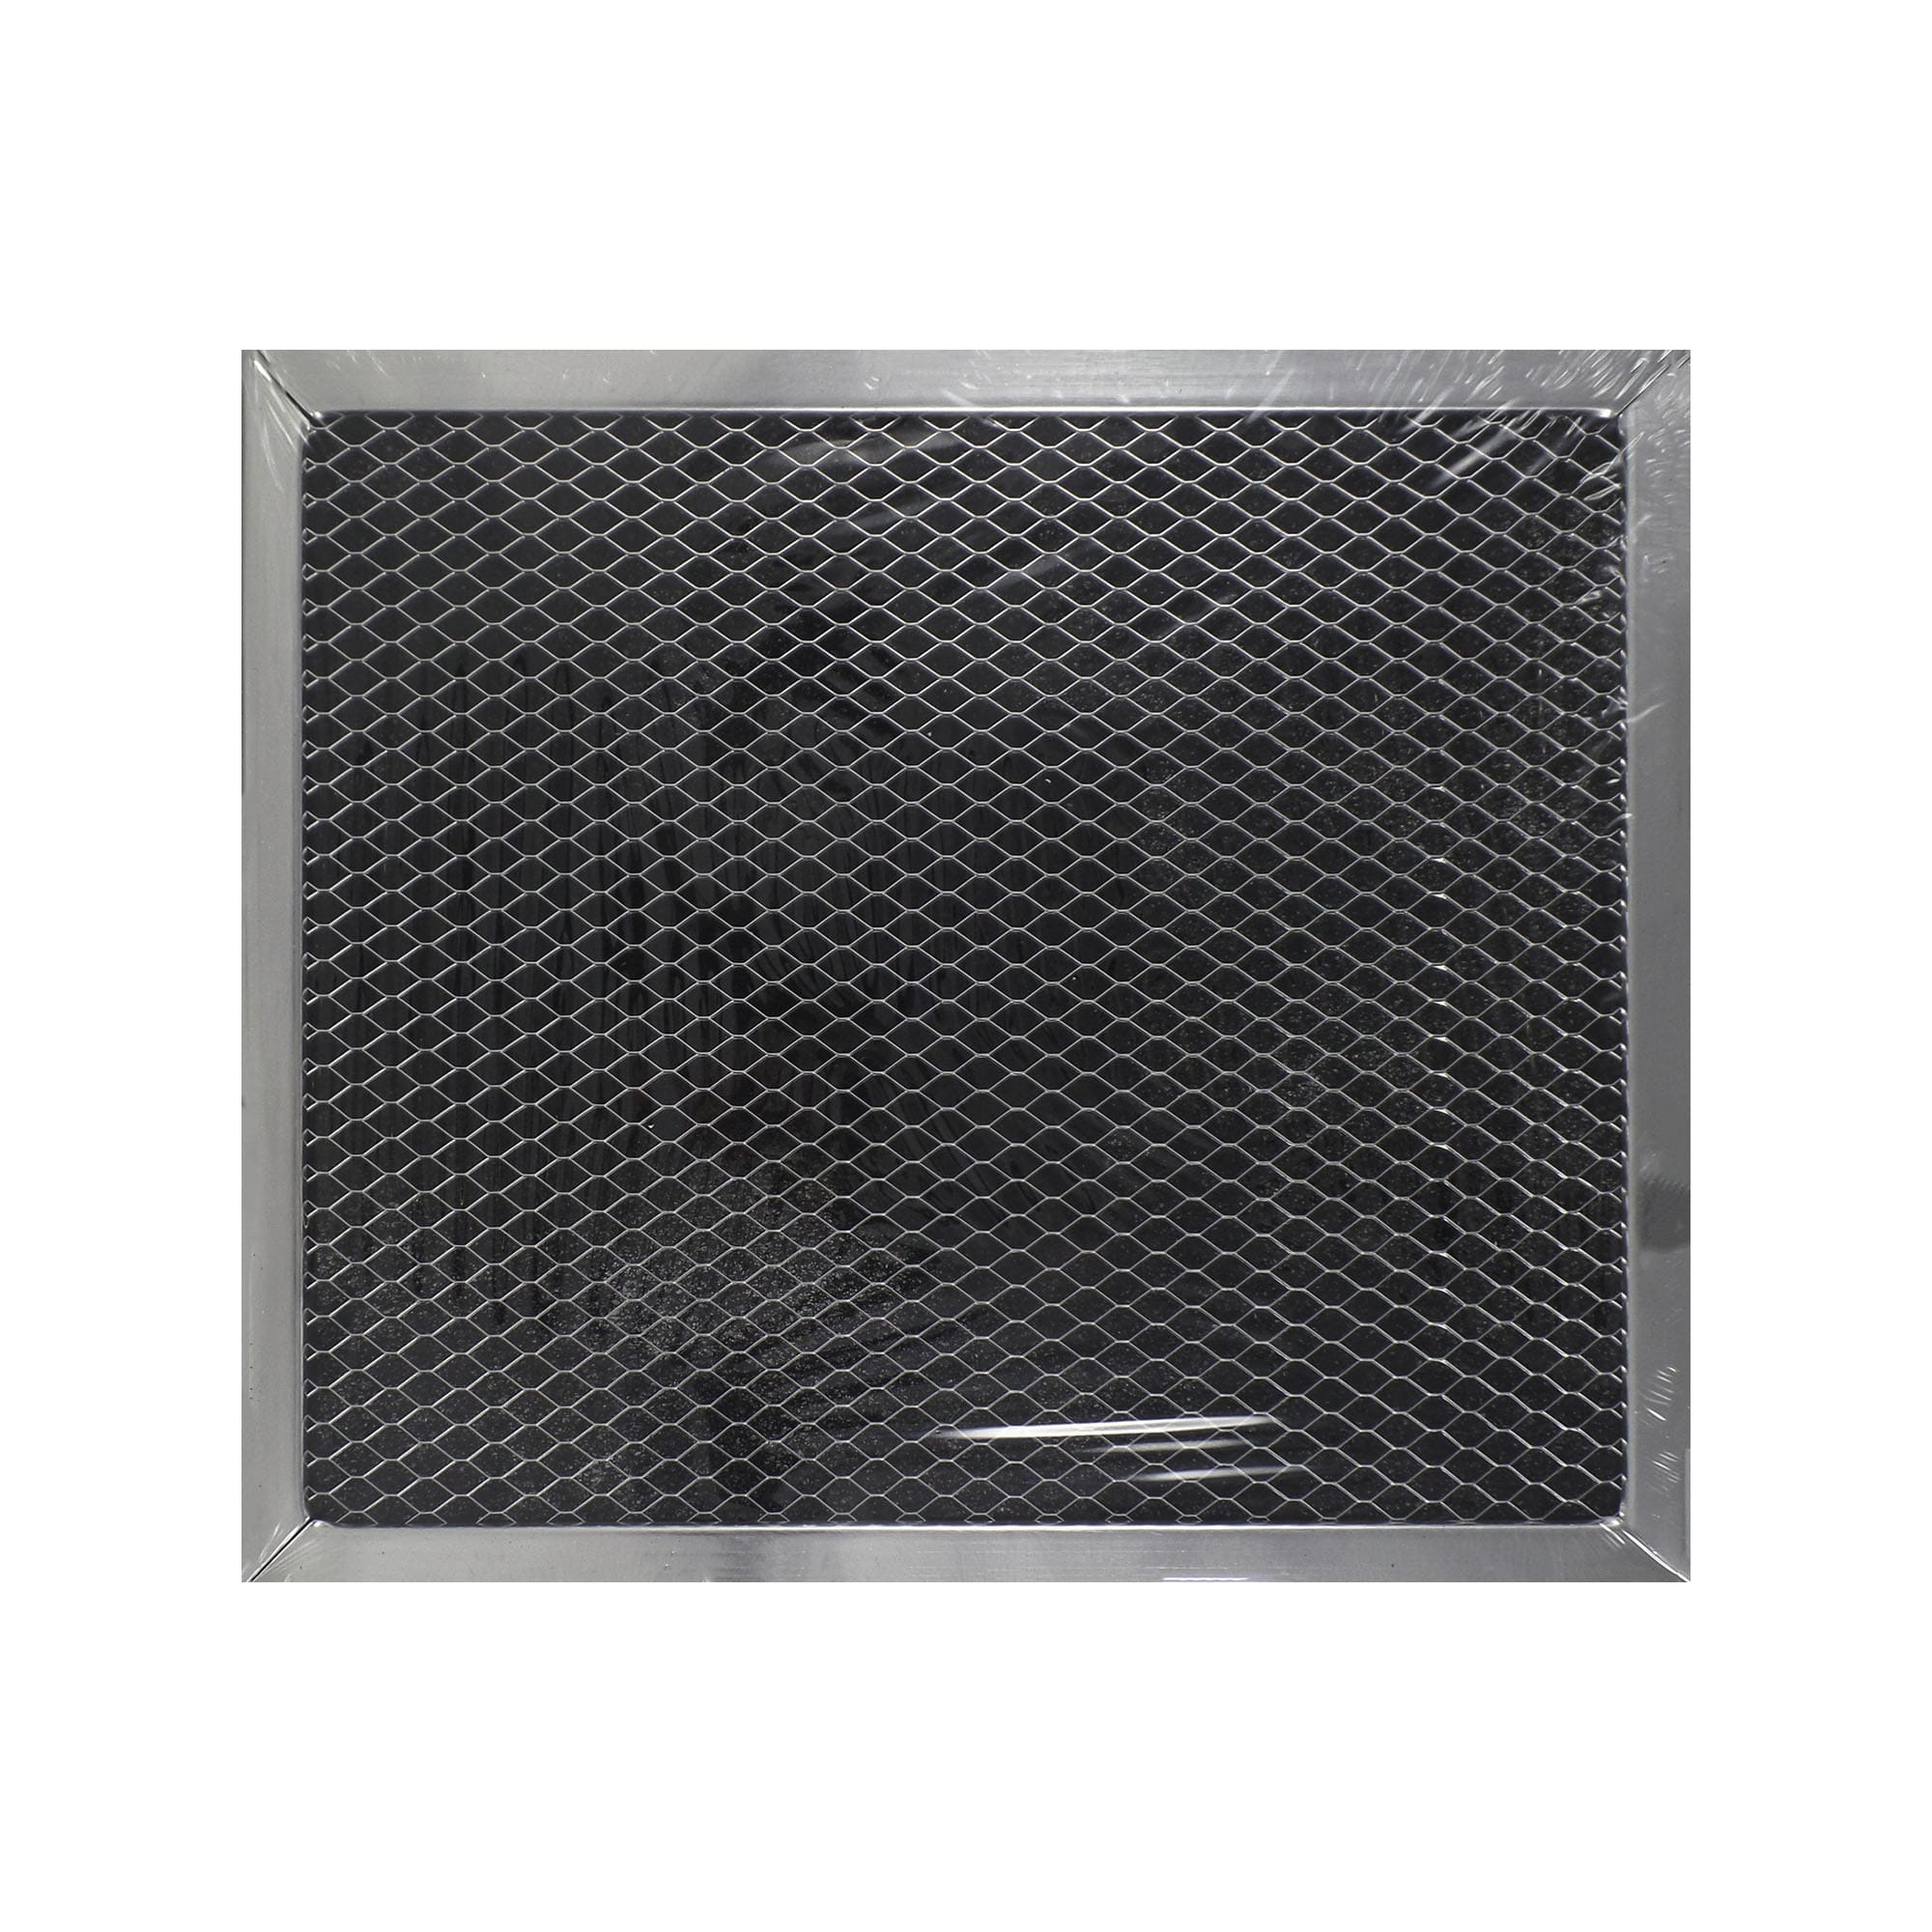 Broan Range Hood Filter Replacement Charcoal 8-3/4 " X 10-1/2 " 